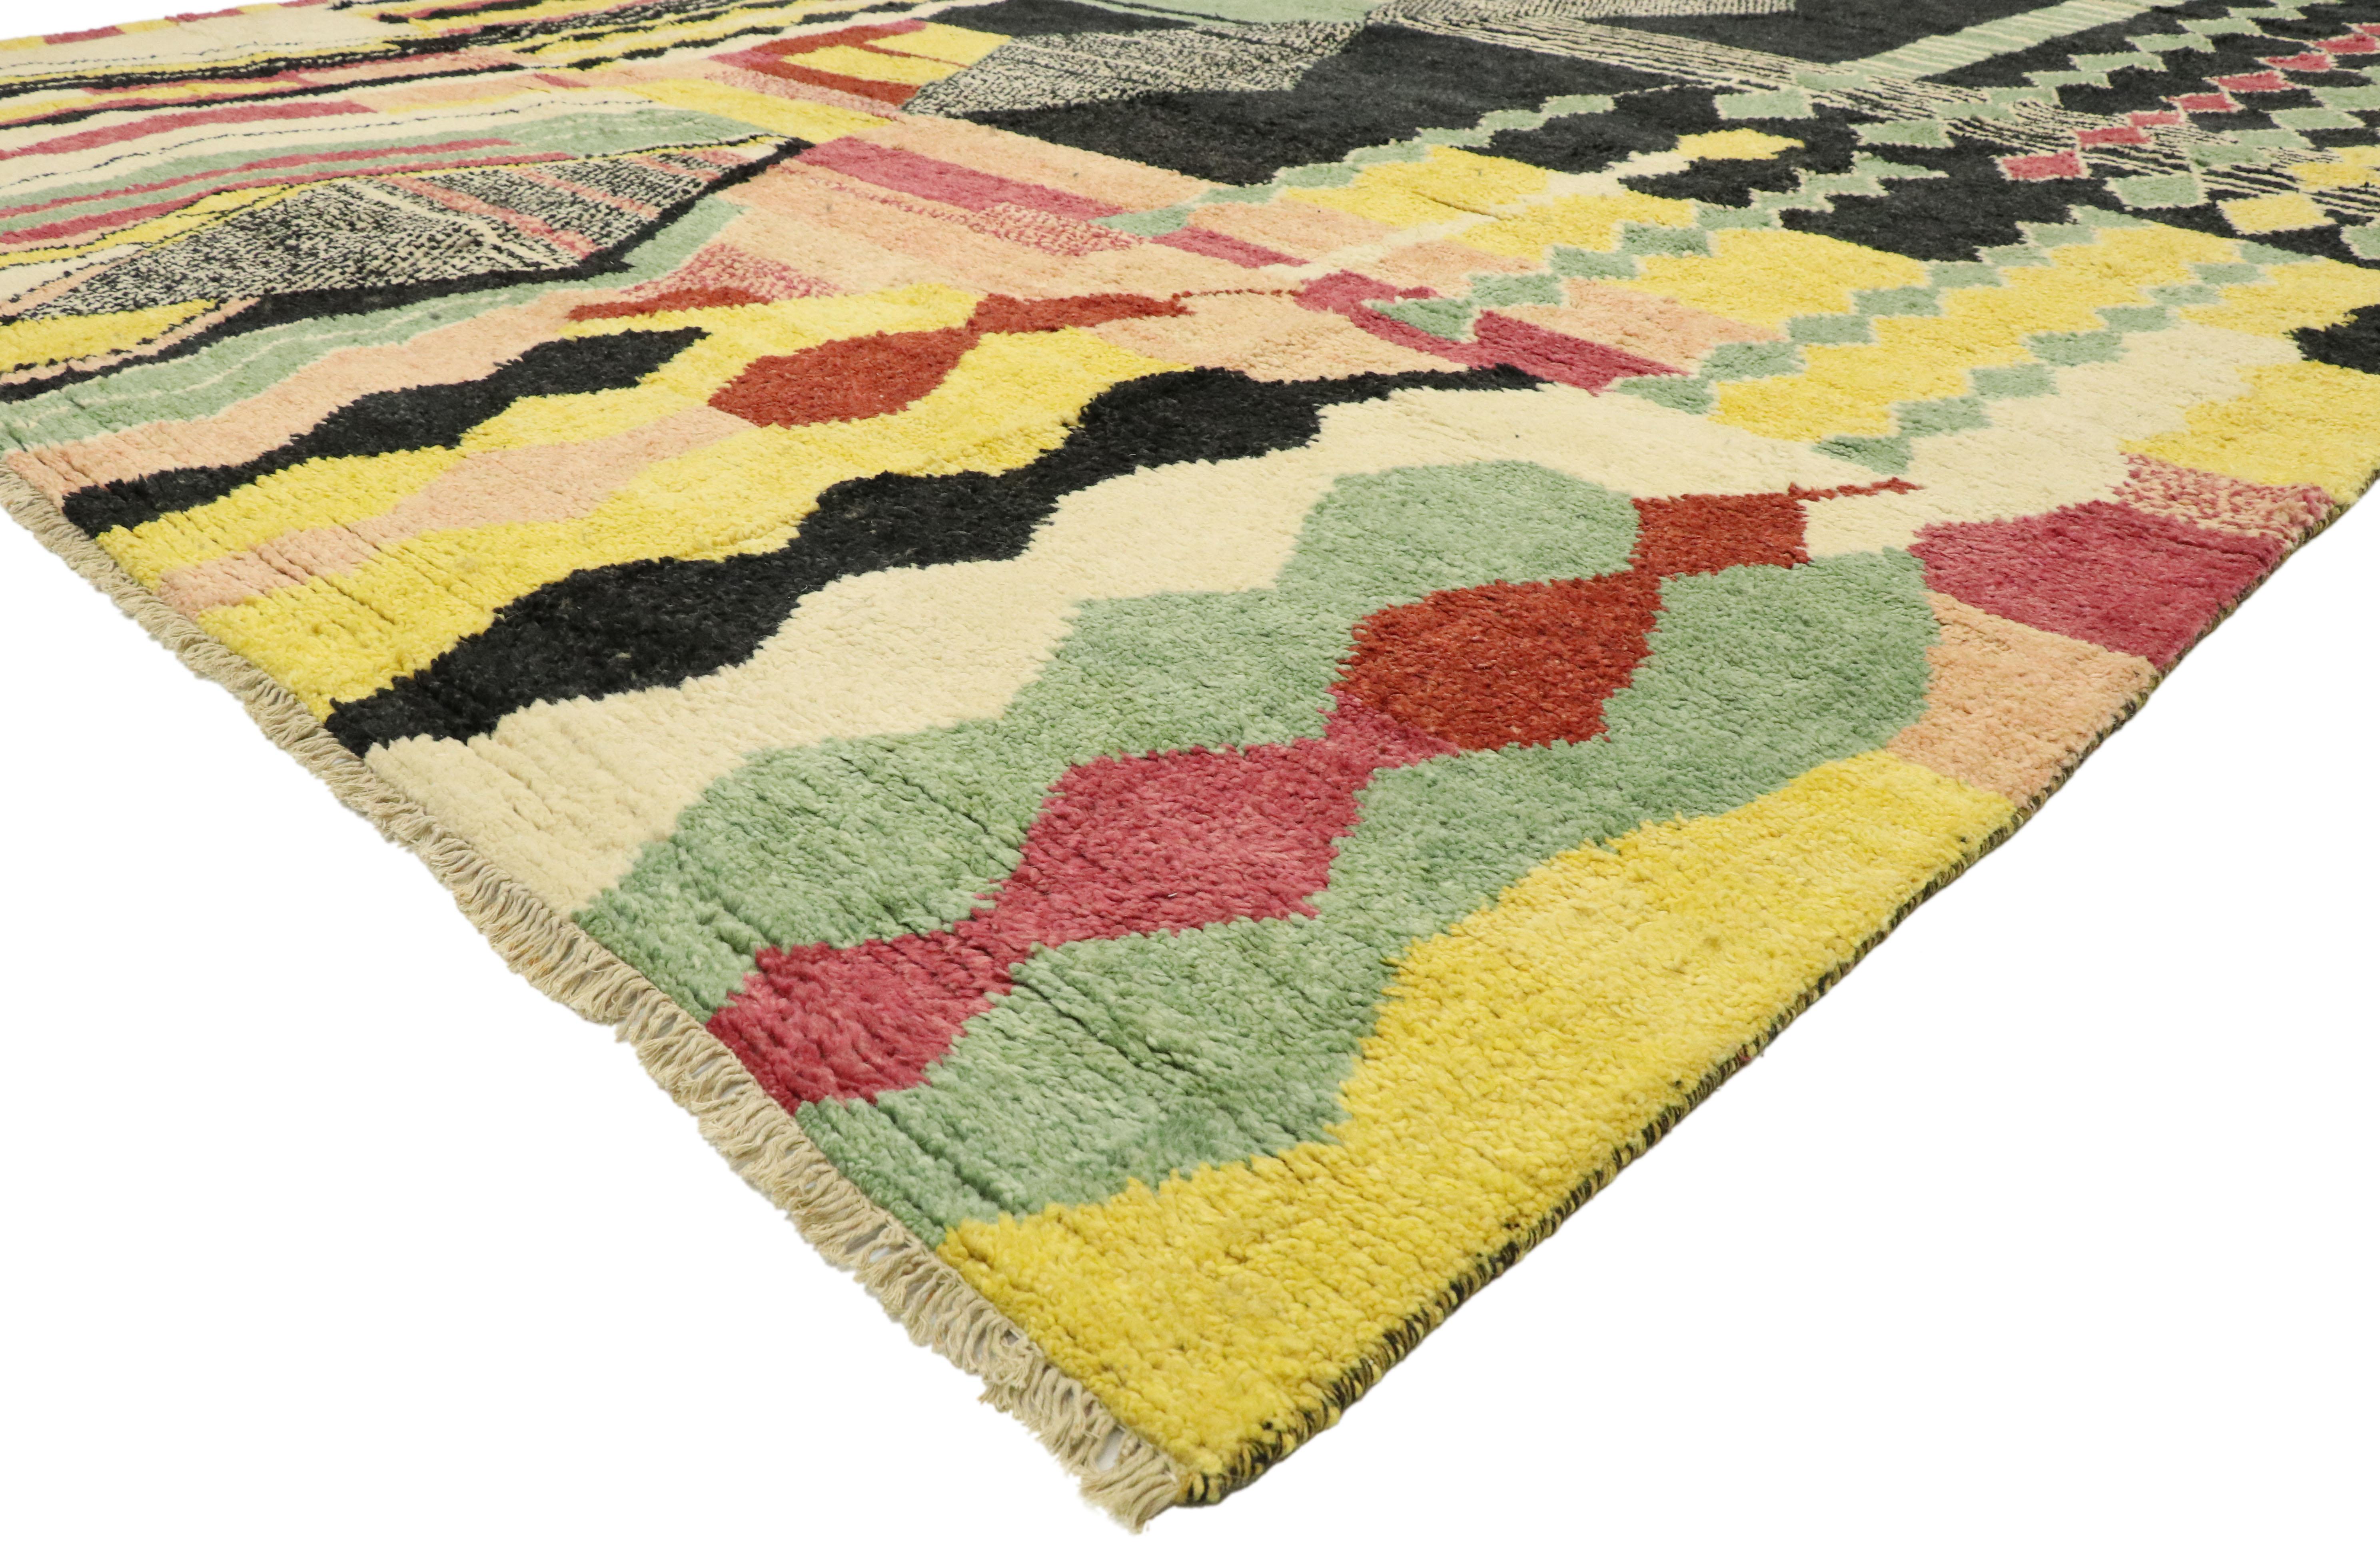 80579 New Contemporary Moroccan Area Rug with Postmodern Abstract Expressionist Style 10'02 x 13'11. Displaying well-balanced asymmetry and a bold linear art form with funky bold pops of color, this hand knotted wool contemporary Moroccan rug